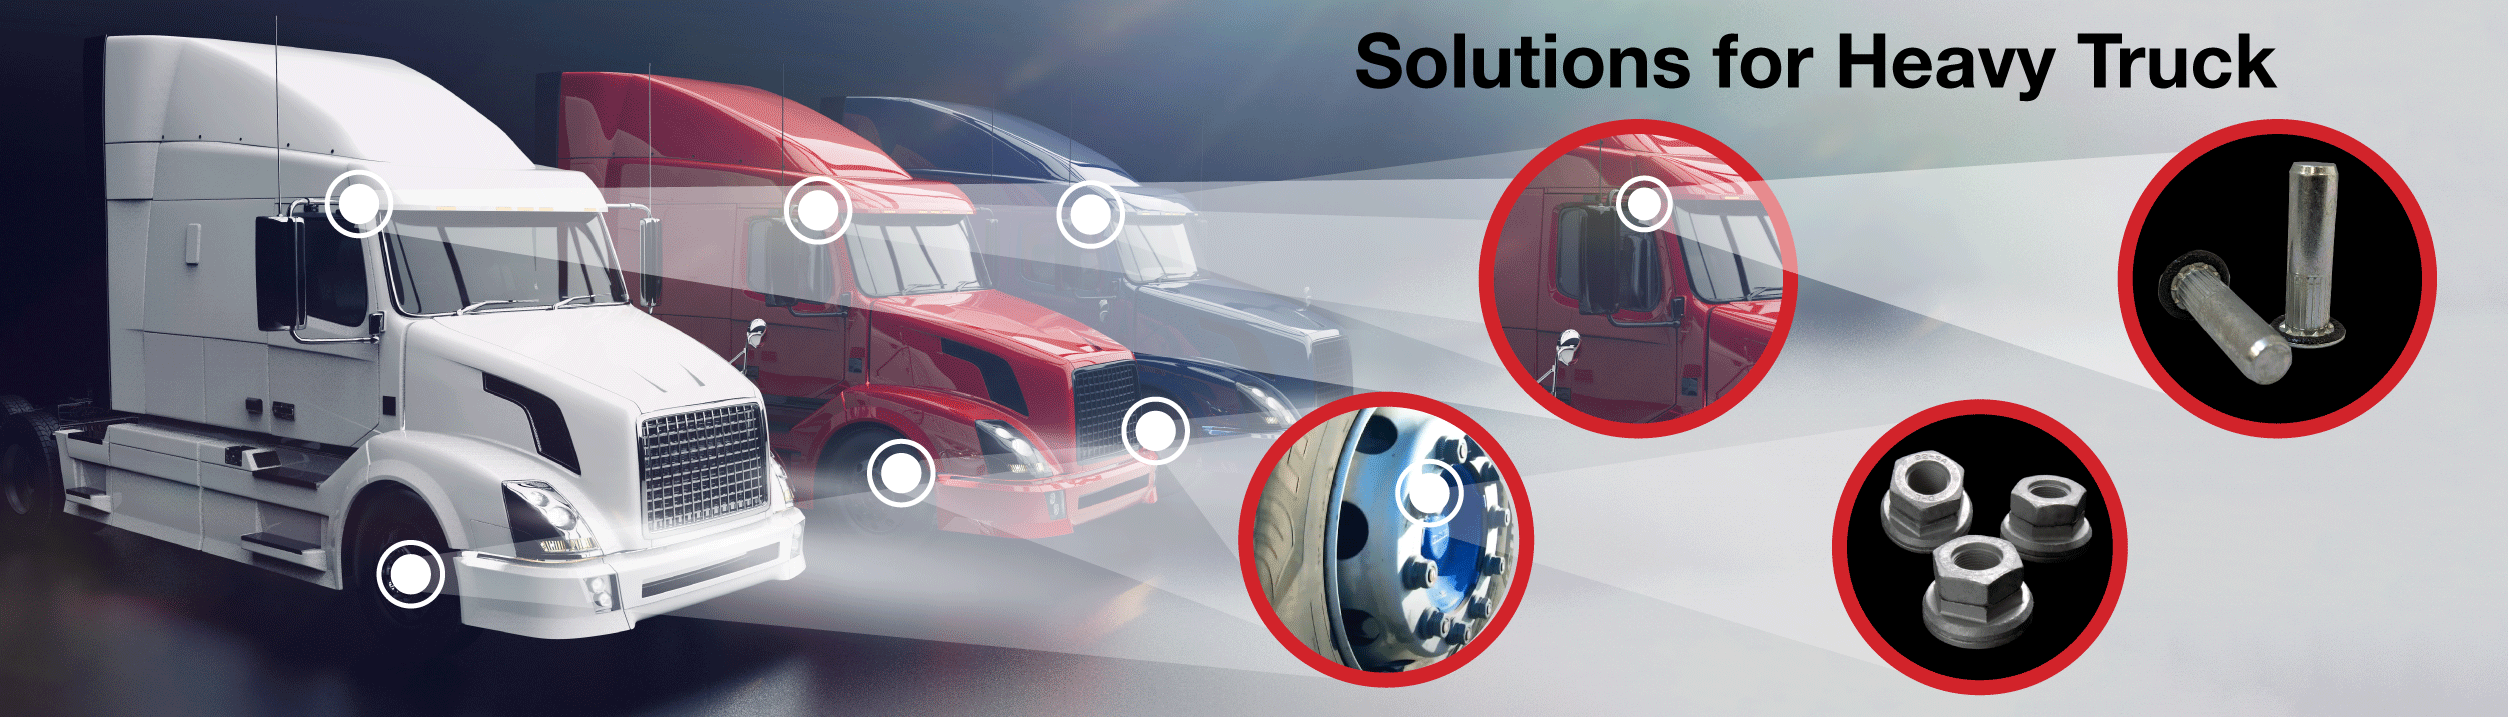 Fastening Solutions for the Heavy Truck Industry - Sherex Fastening  Solutions